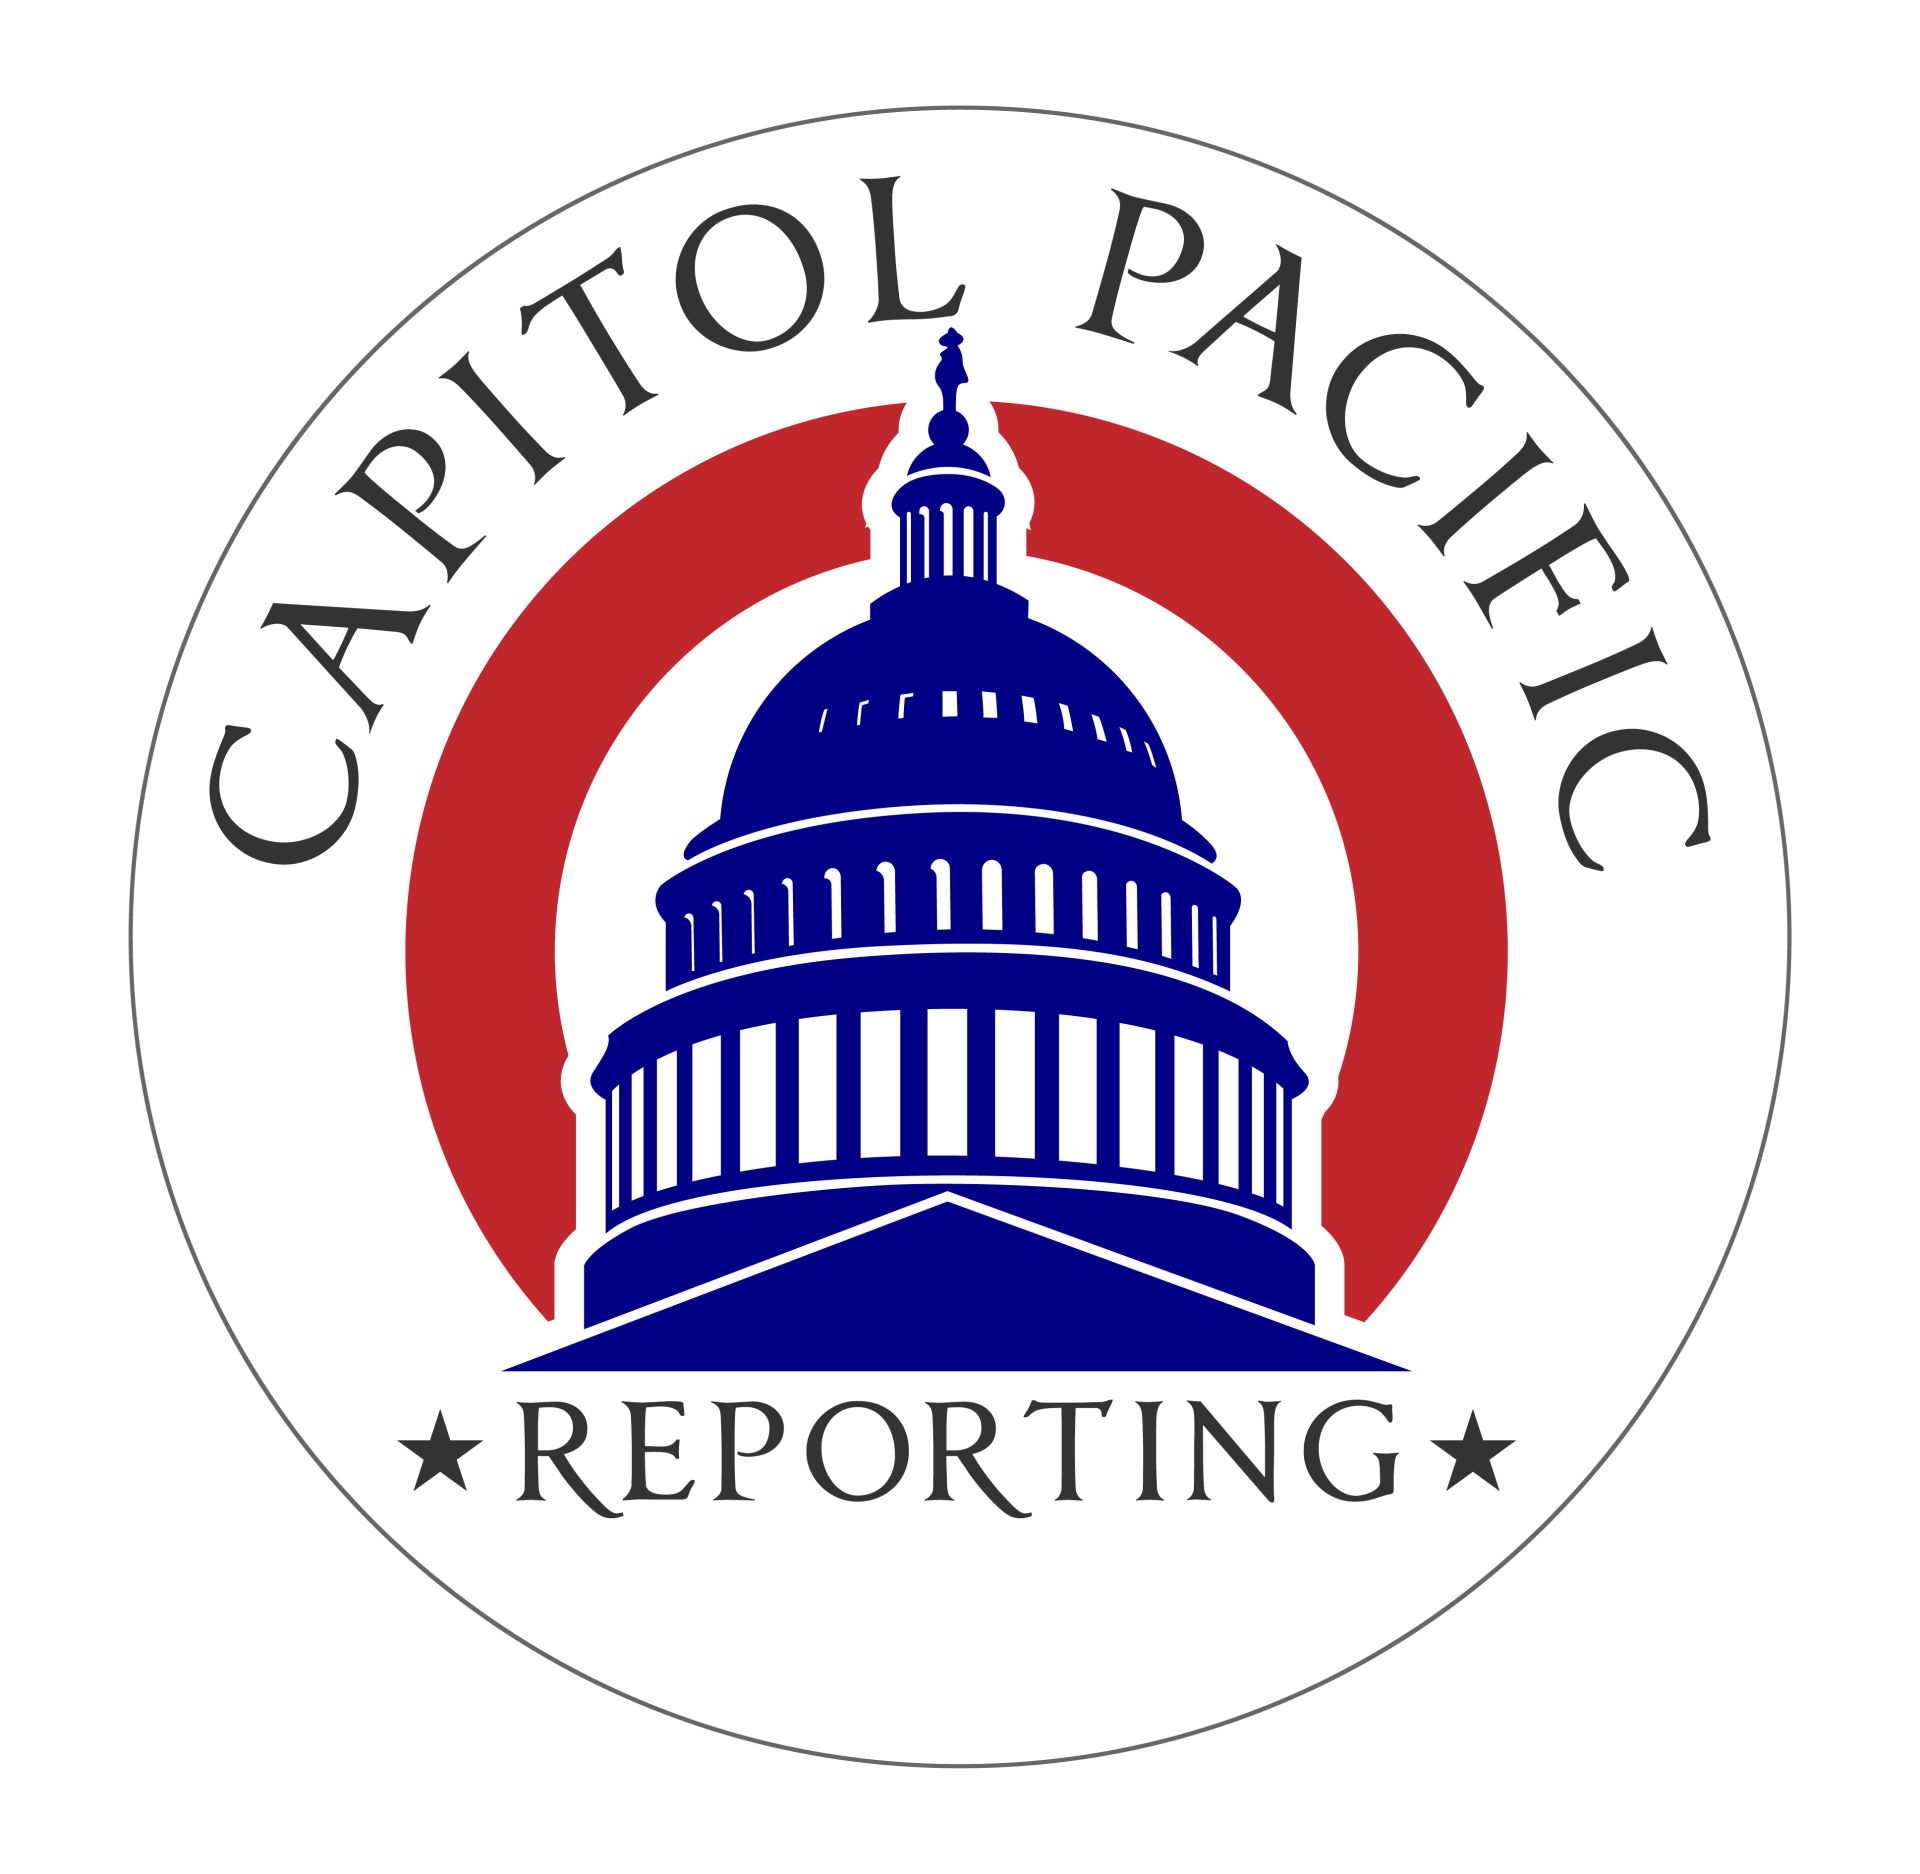 Capitol Pacific Reporting